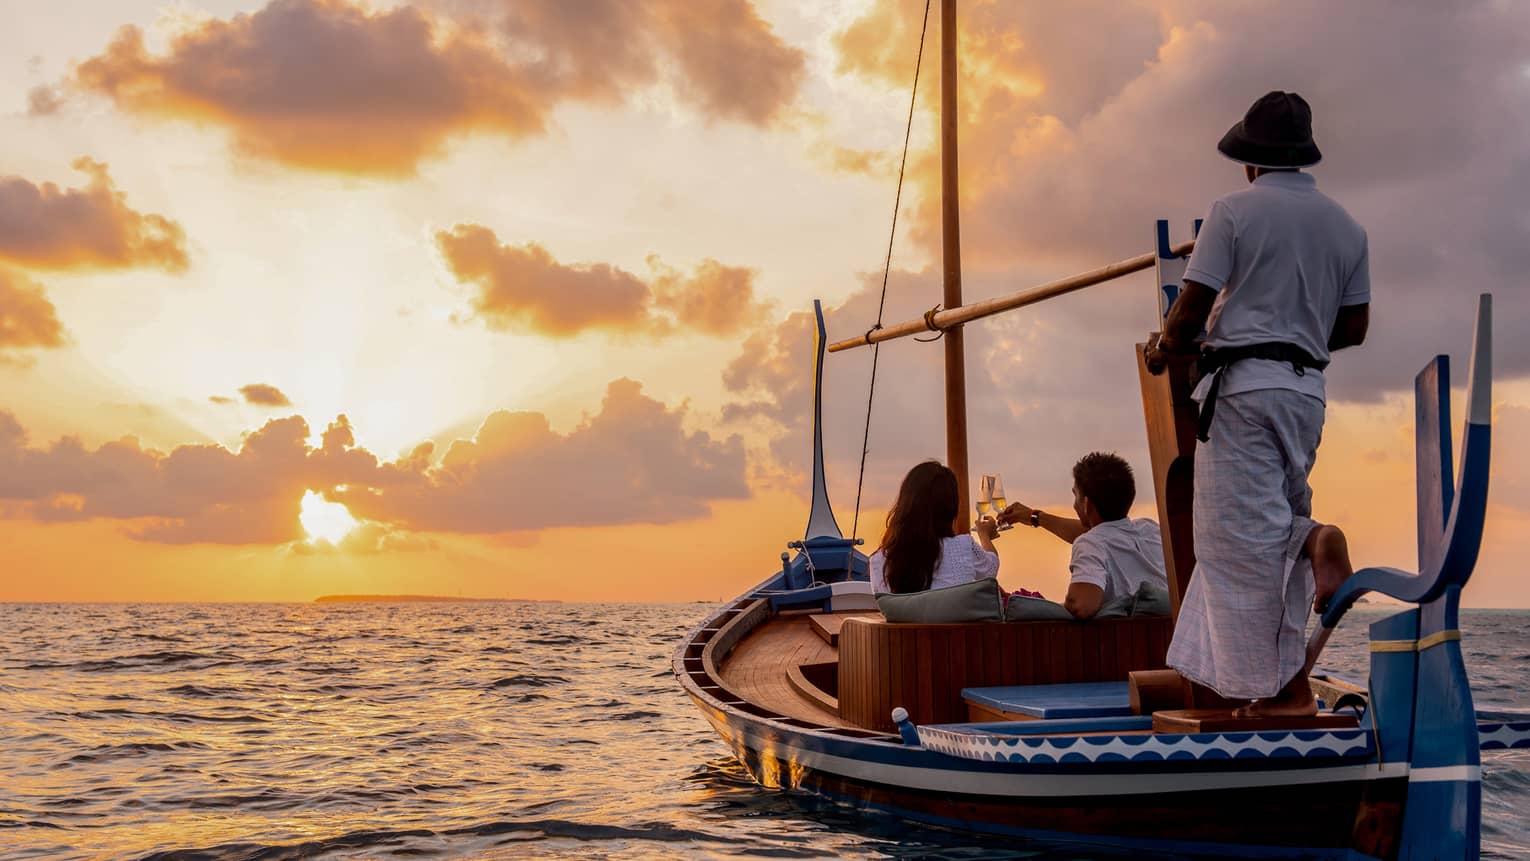 Rear view of two people seated in a dhoni boat, toasting with champagne, the boat handler steering into the golden sunset.